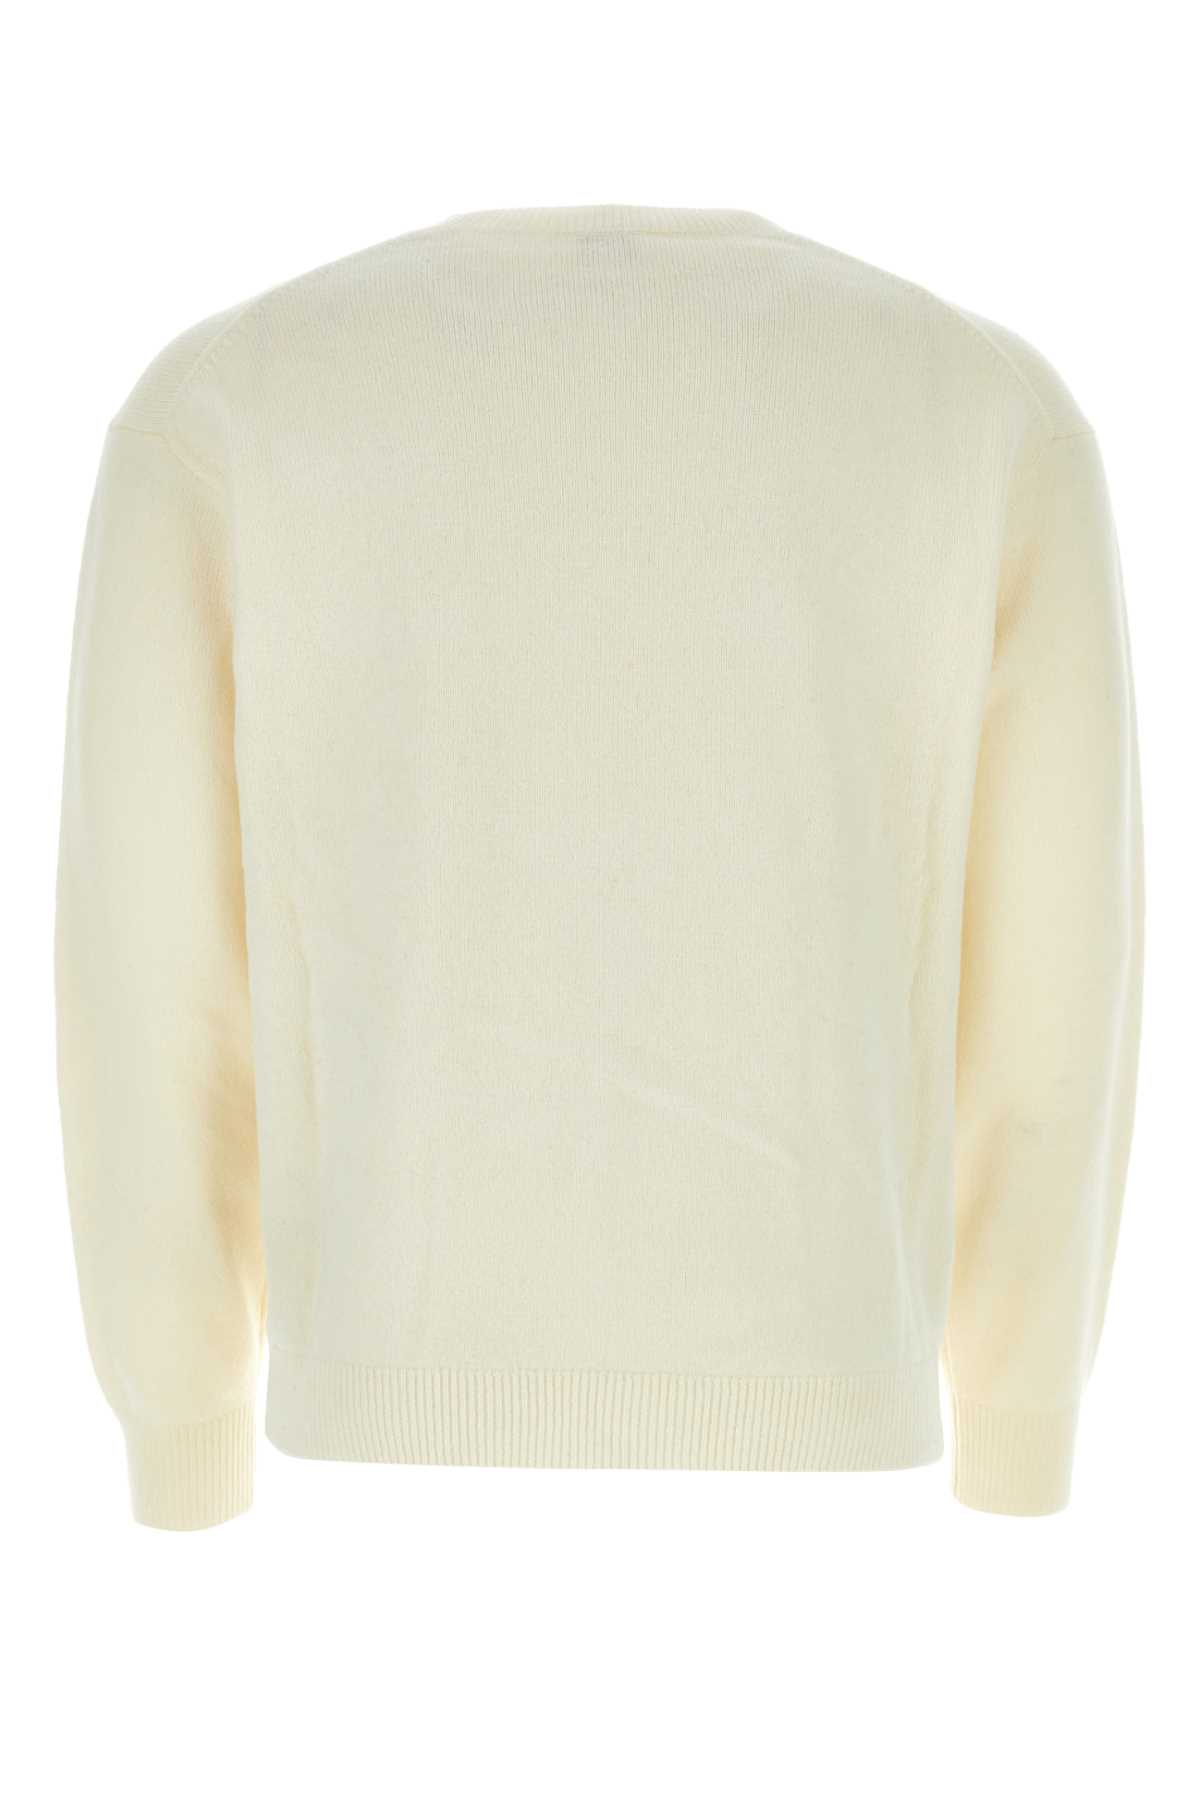 Shop Kenzo Ivory Wool Sweater In Offwhite